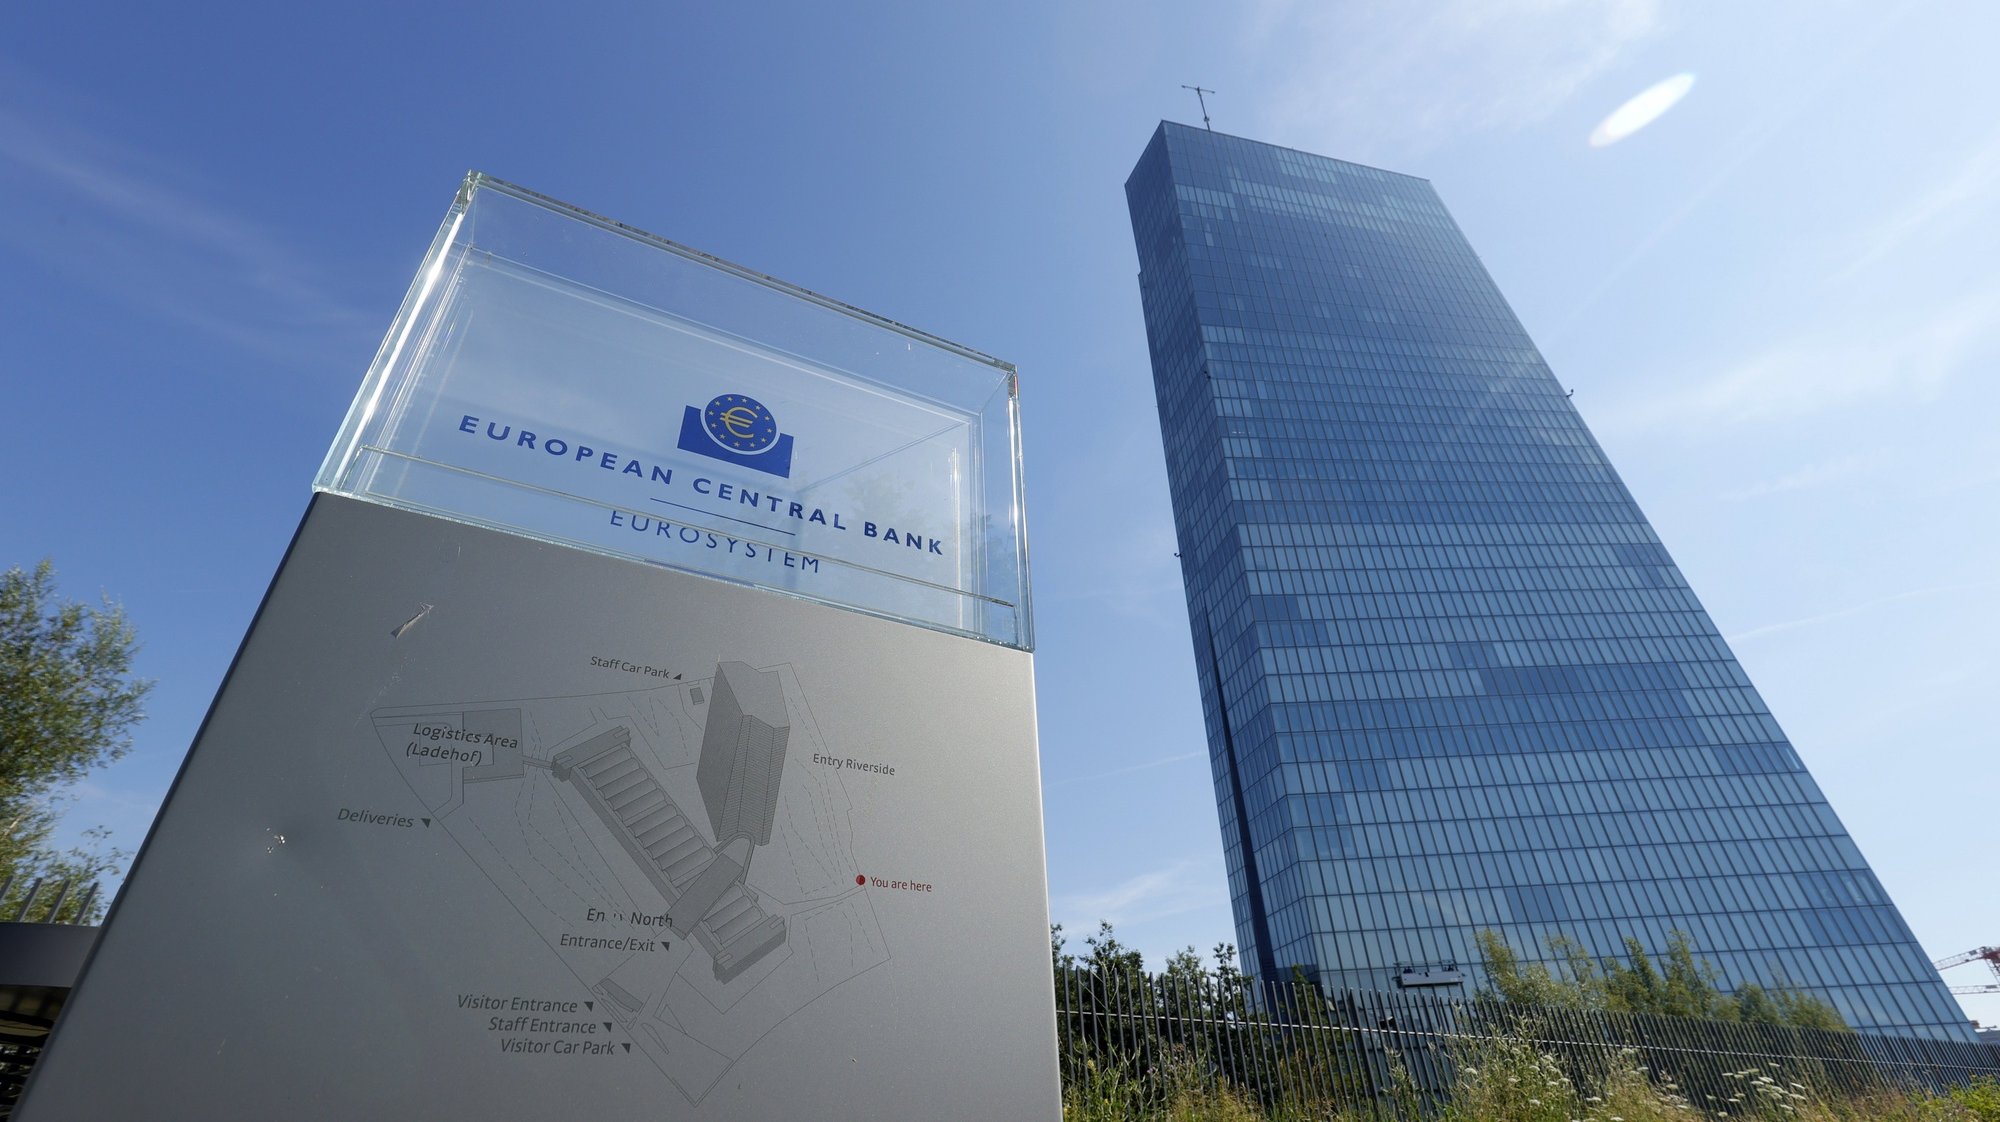 epa08545436 A general view of a sign in front of the building of the European Central Bank (ECB) in Frankfurt am Main, Germany, 14 July 2020.  EPA/RONALD WITTEK